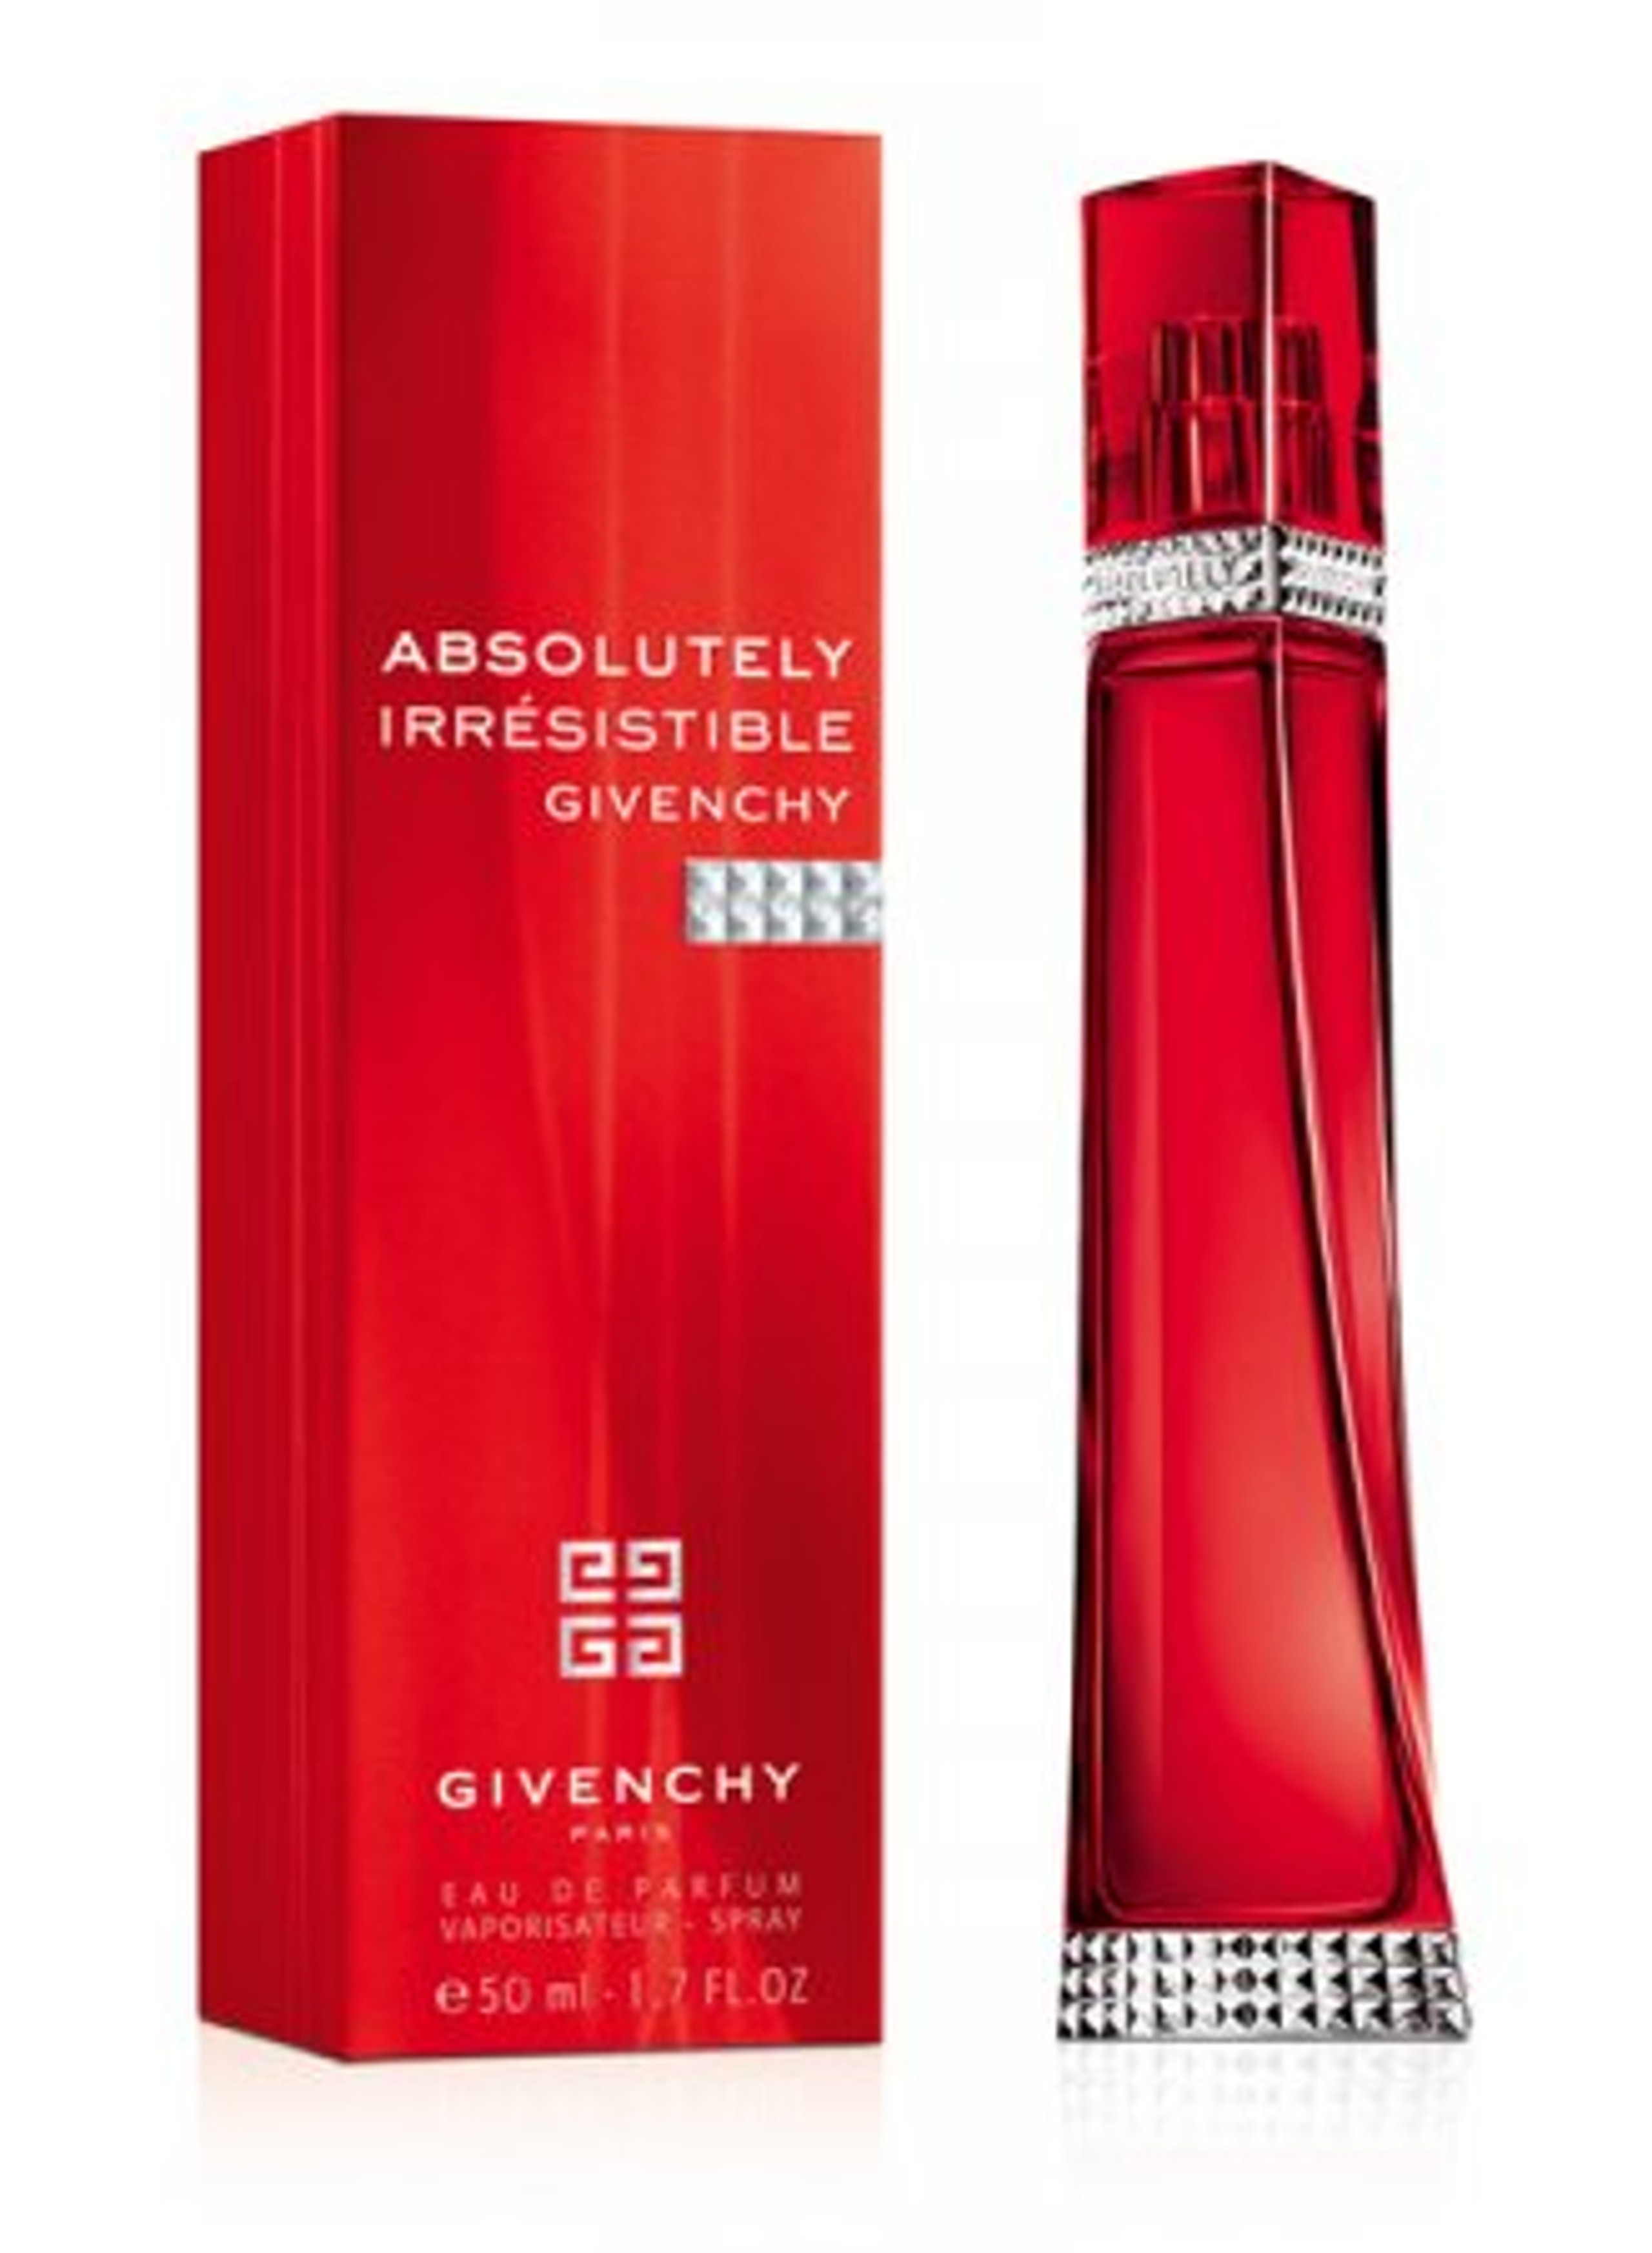 Absolutely Irresistible Perfume by Givenchy 2.5 oz EDP Spray